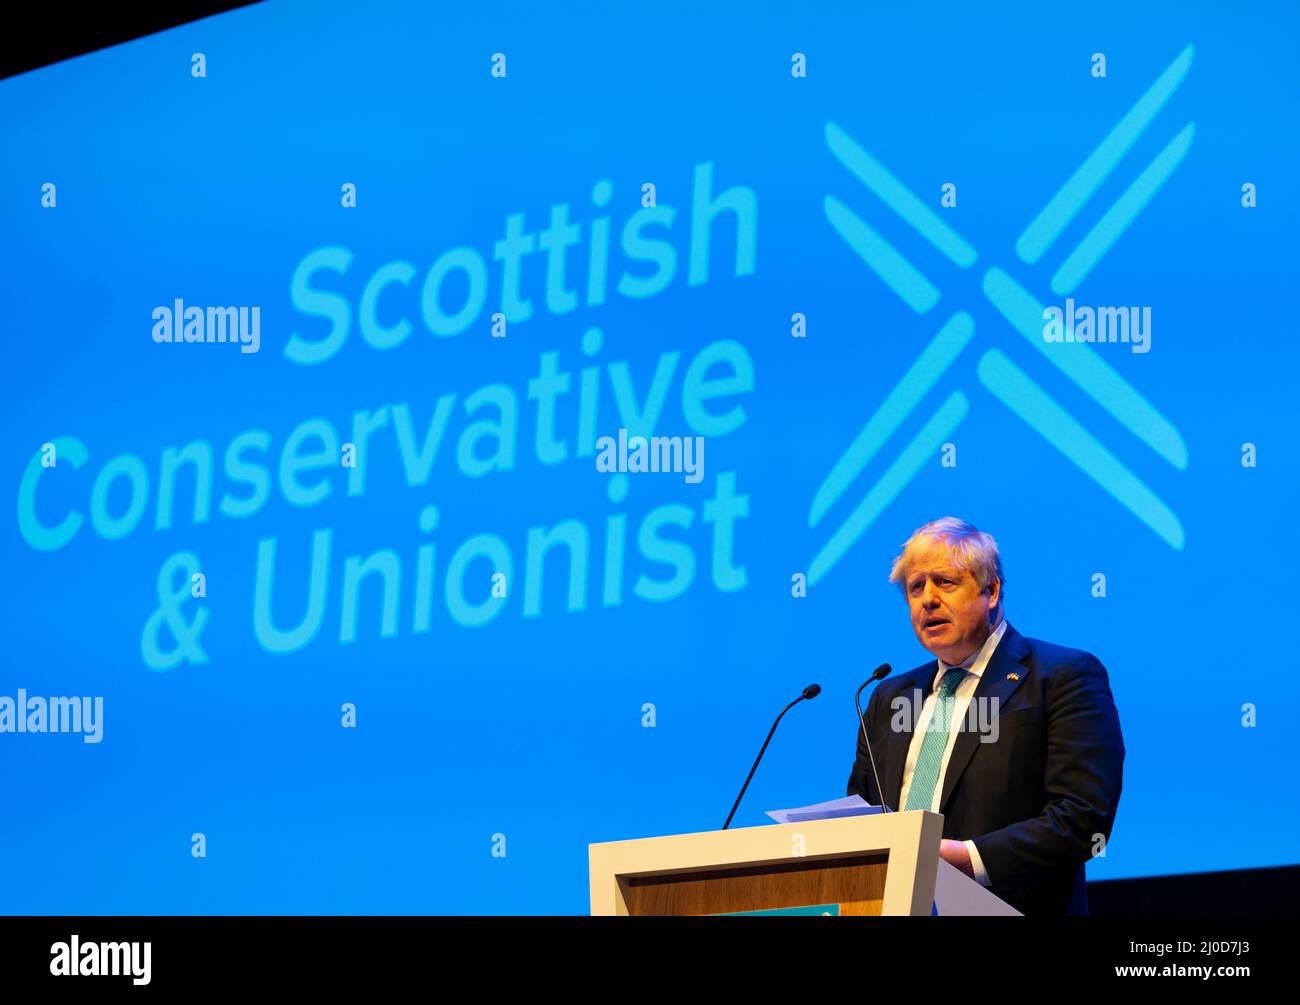 Aberdeen, Scotland, UK. 18th March 2022.   Prime Minister Boris Johnson keynote speech at Scottish Conservative party Conference 2022 at P&J conference venue in Aberdeen, Scotland. Iain Masterton/Alamy Live News Stock Photo